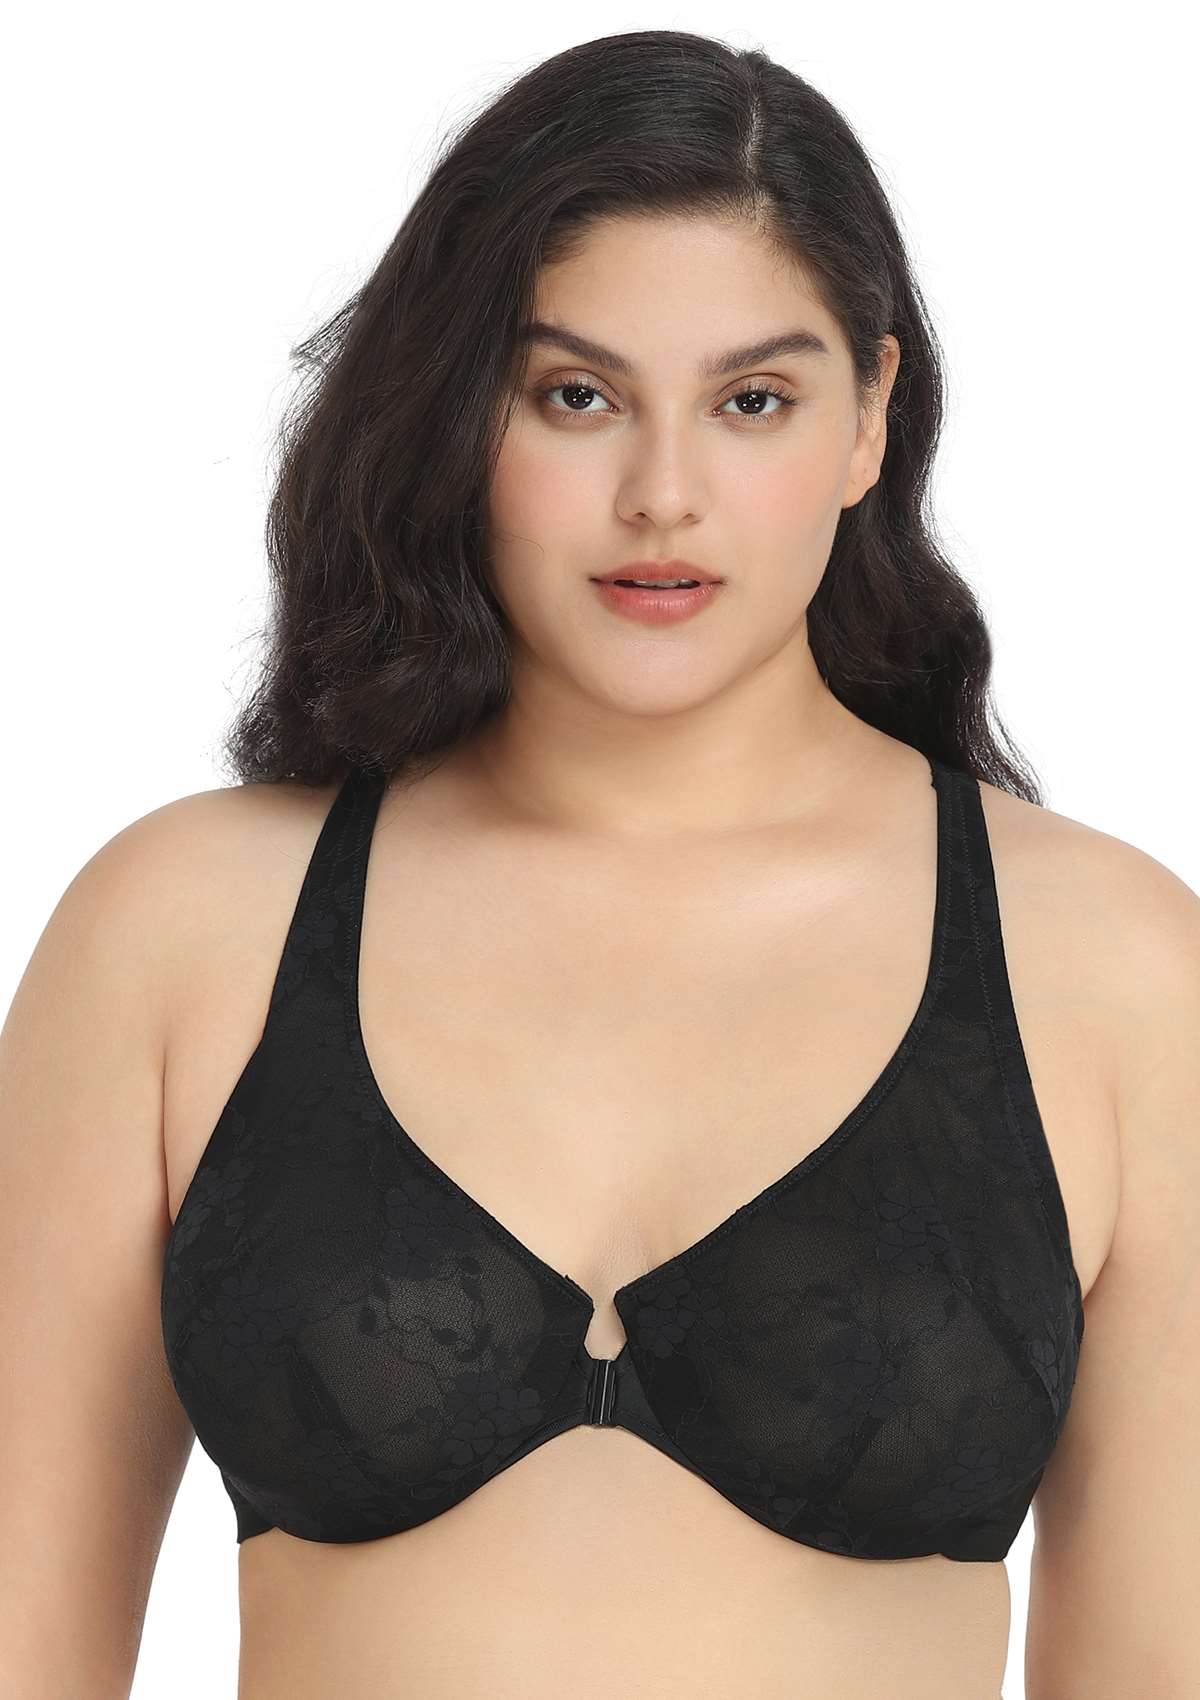 HSIA Spring Romance Front-Close Floral Lace Unlined Full Coverage Bra - Black / 36 / C